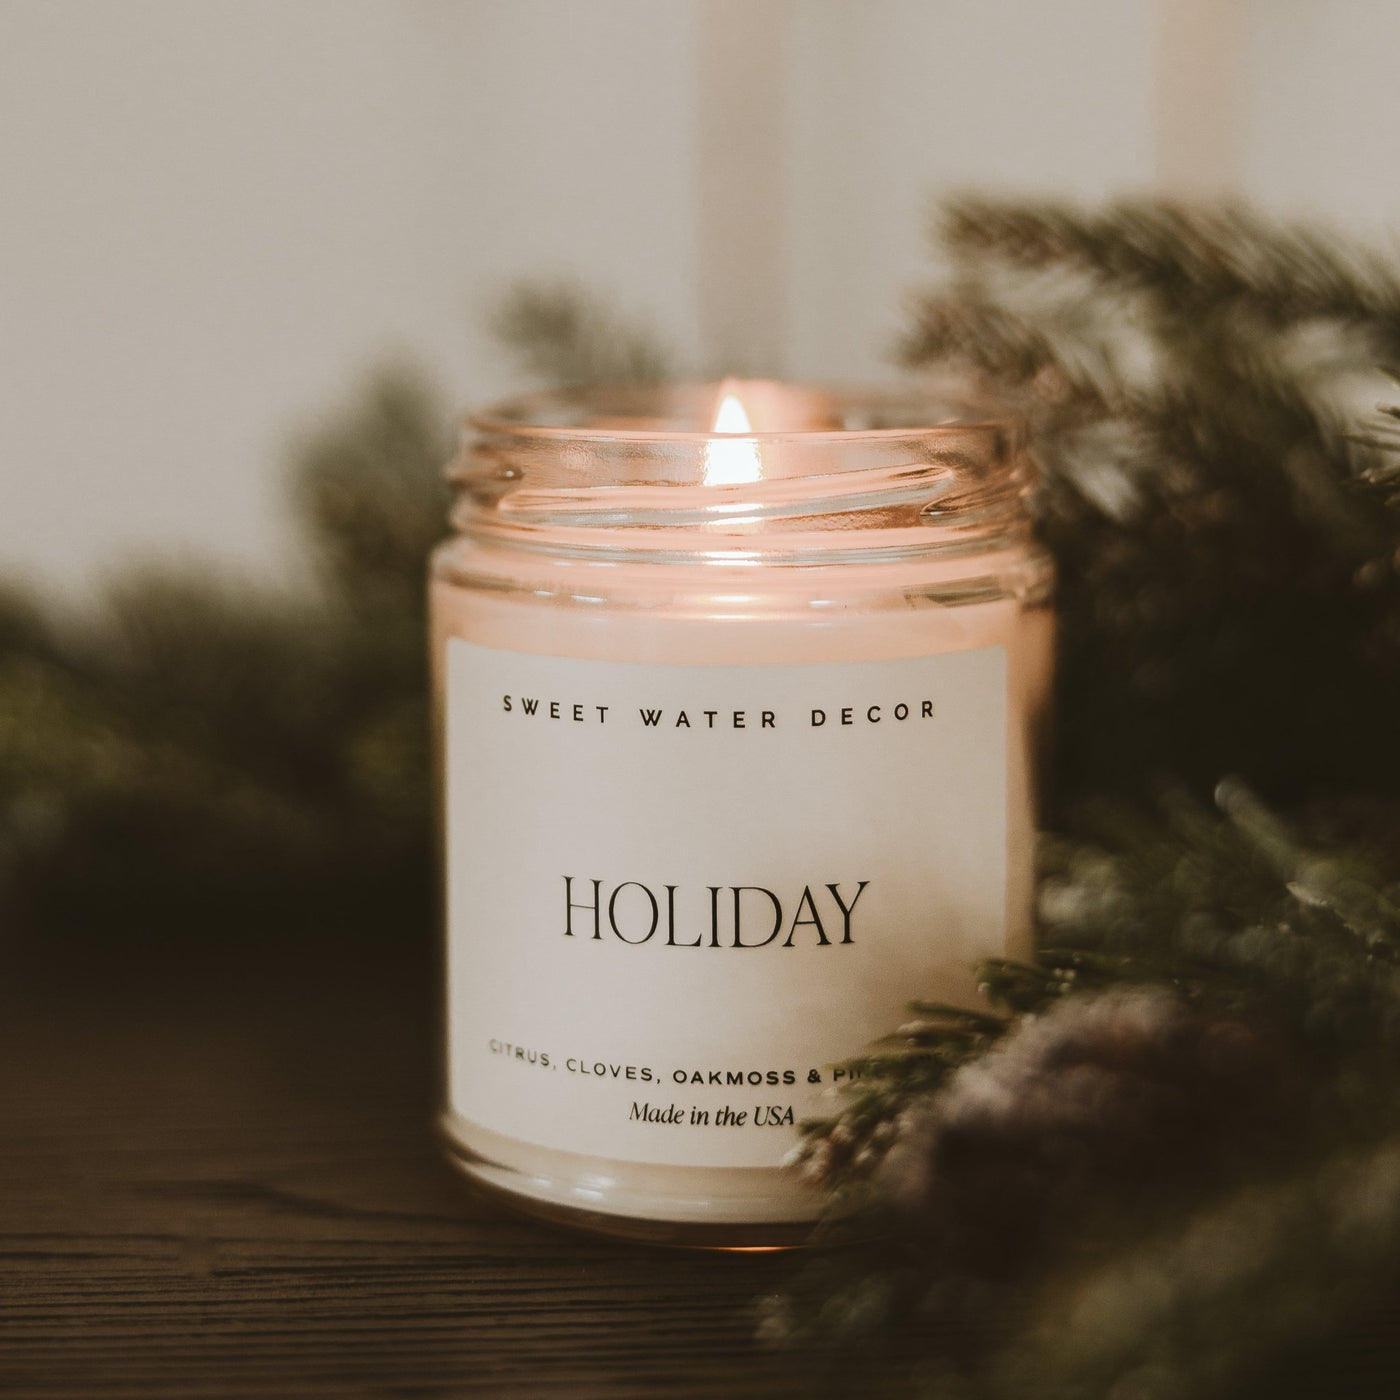 Holiday Soy Candle - Clear Jar - 9 oz - Sweet Water Decor - Candles